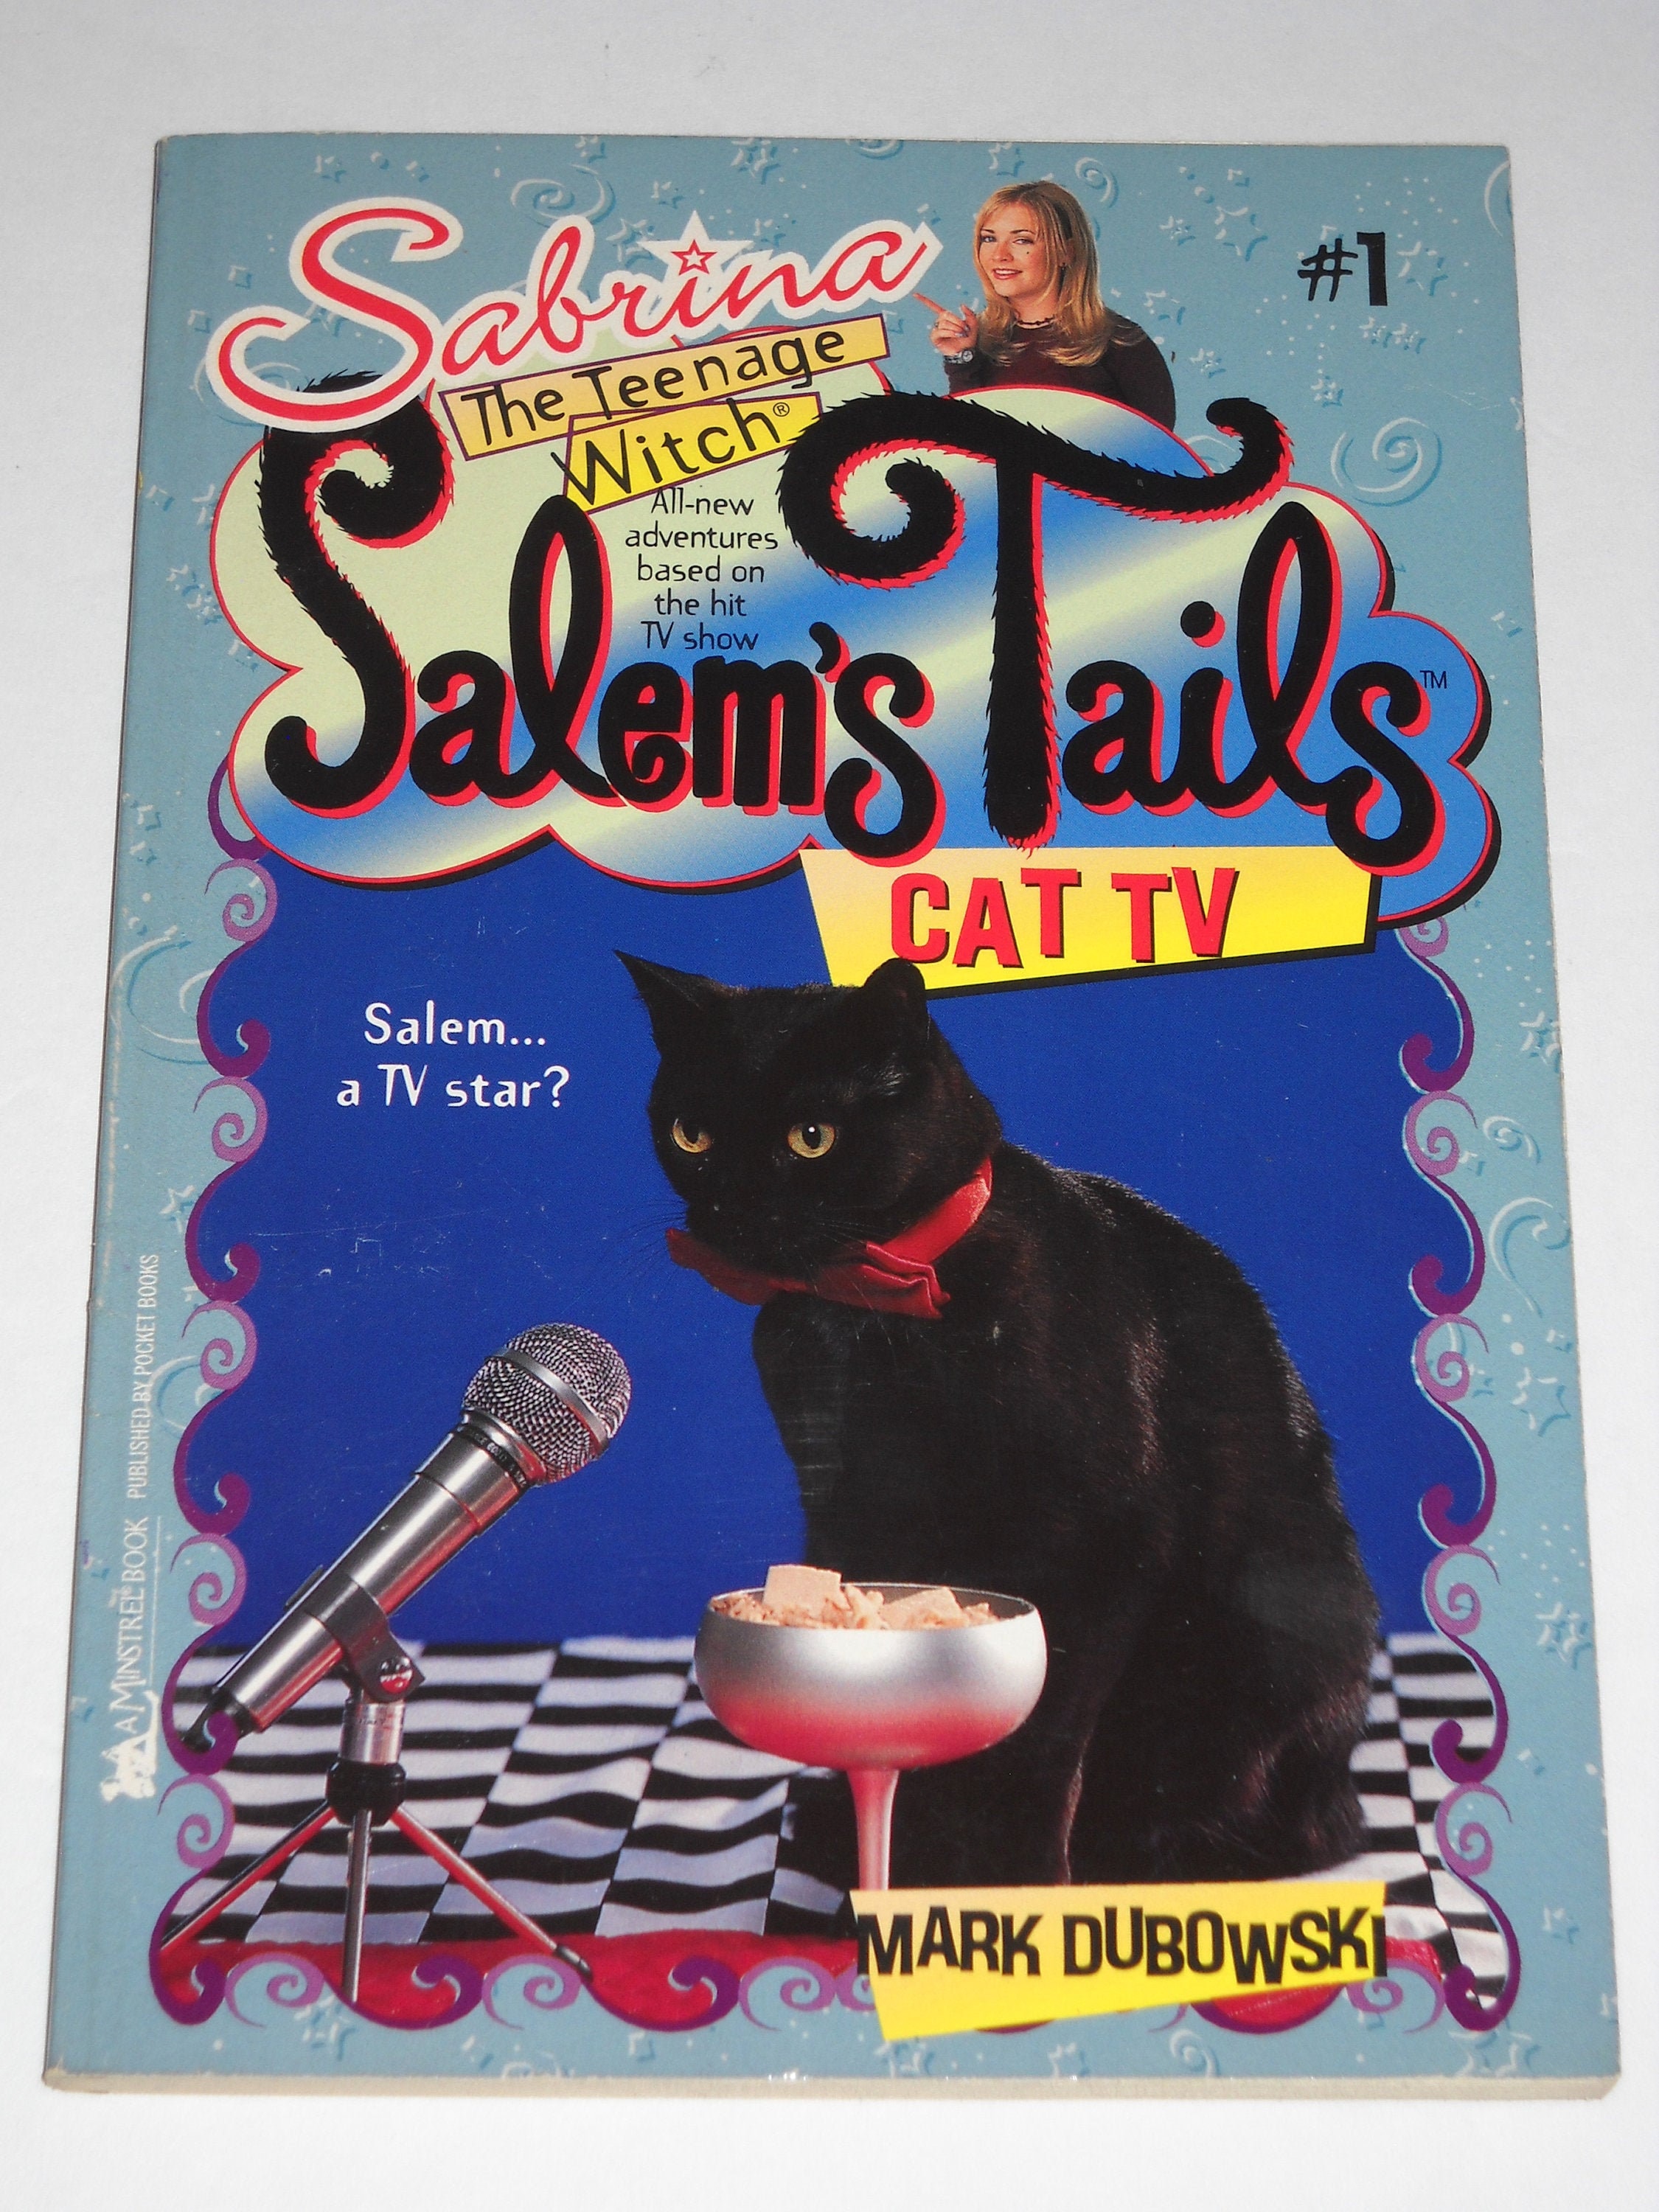 1998 Sabrina the Teenage Witch Salem's Tails 1-8 your Choice TV Tie-in  Vintage Paperback Books Archie Comics Melissa Joan Hart - Etsy